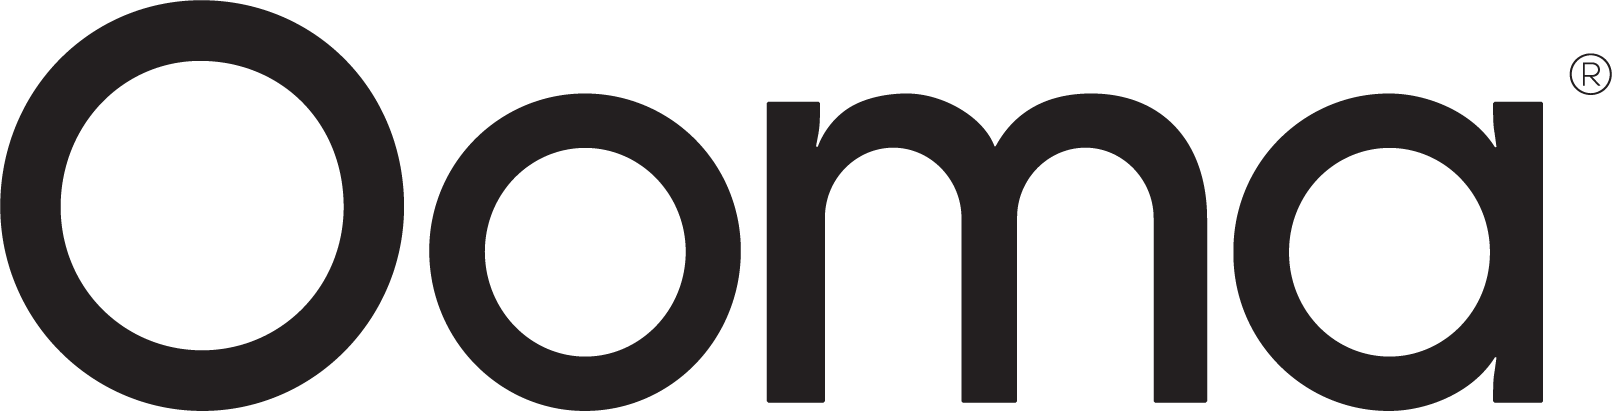 new Ooma logo.png